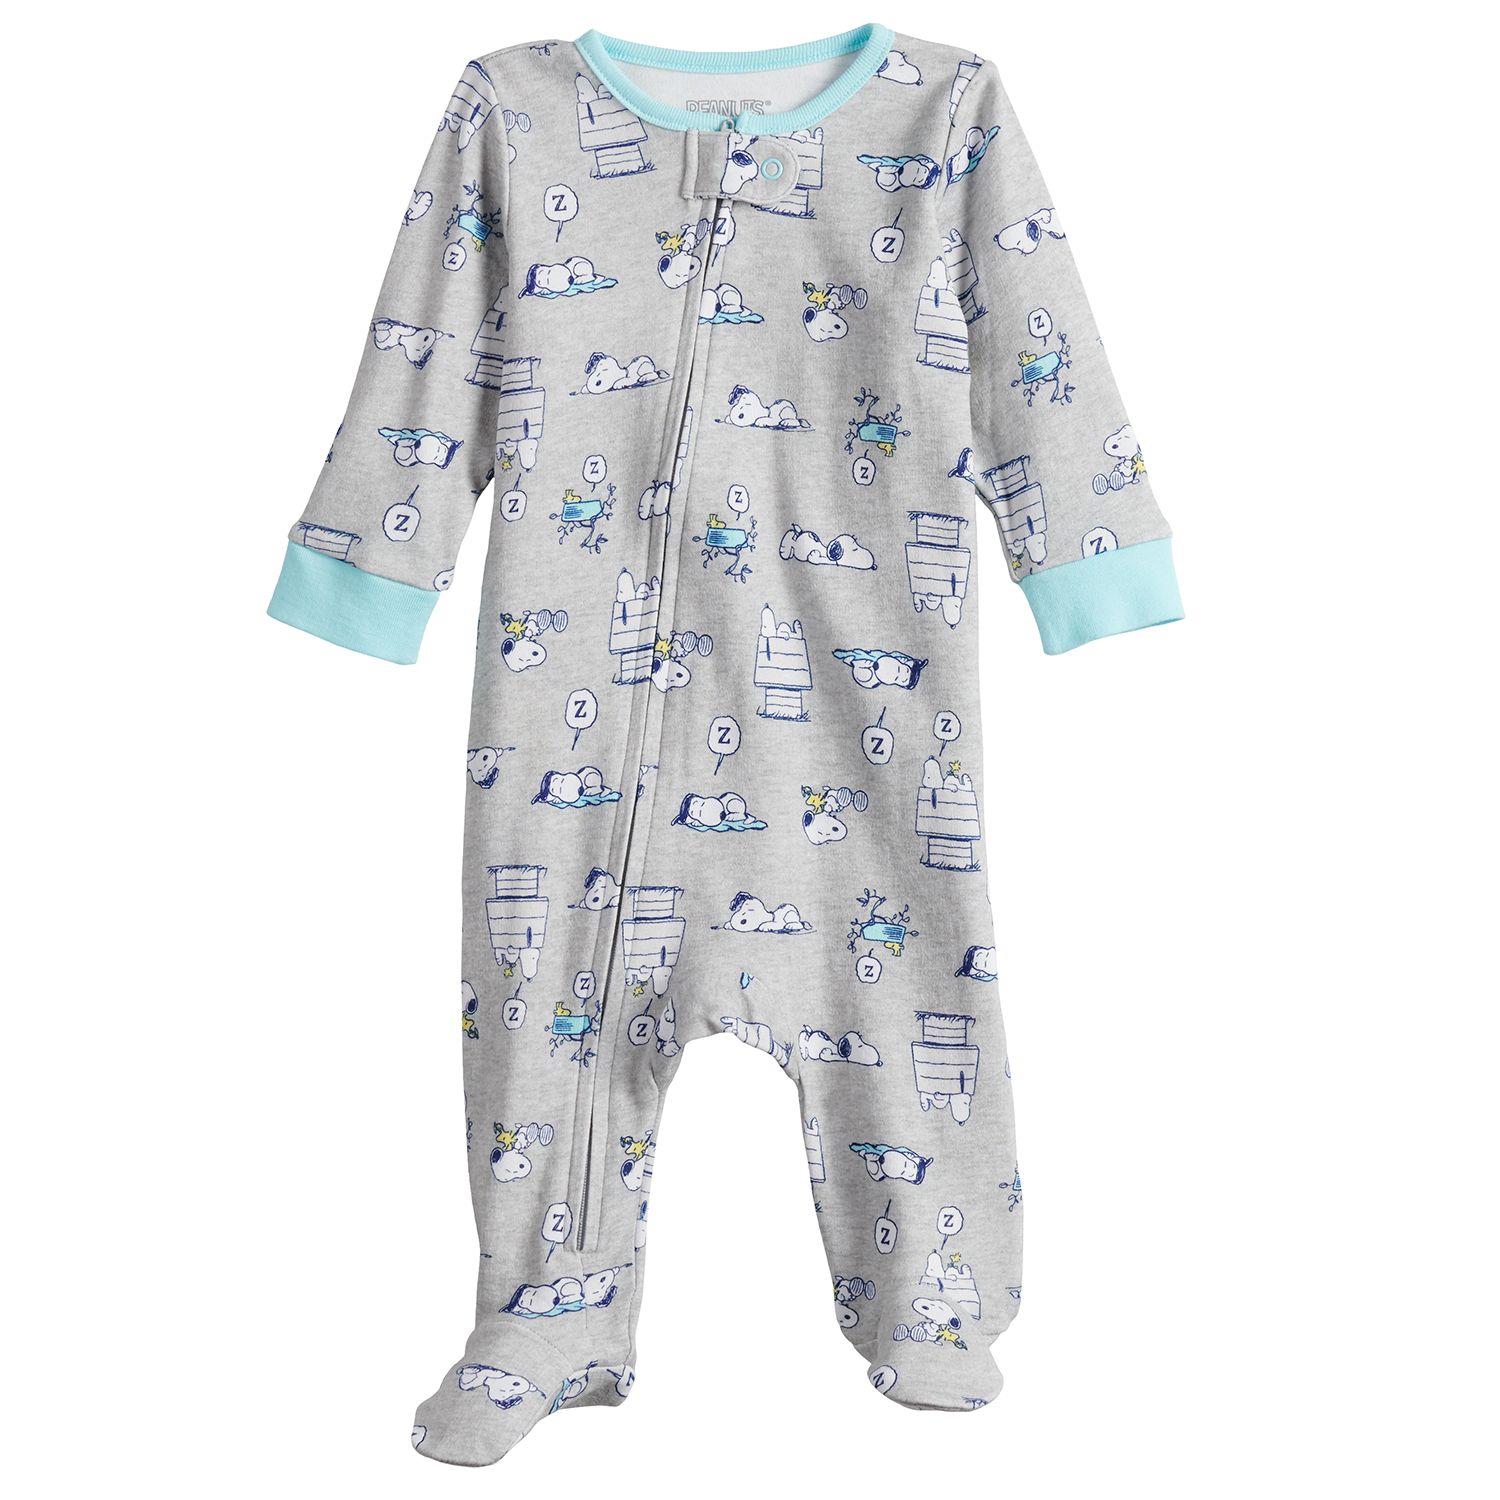 snoopy outfits for babies